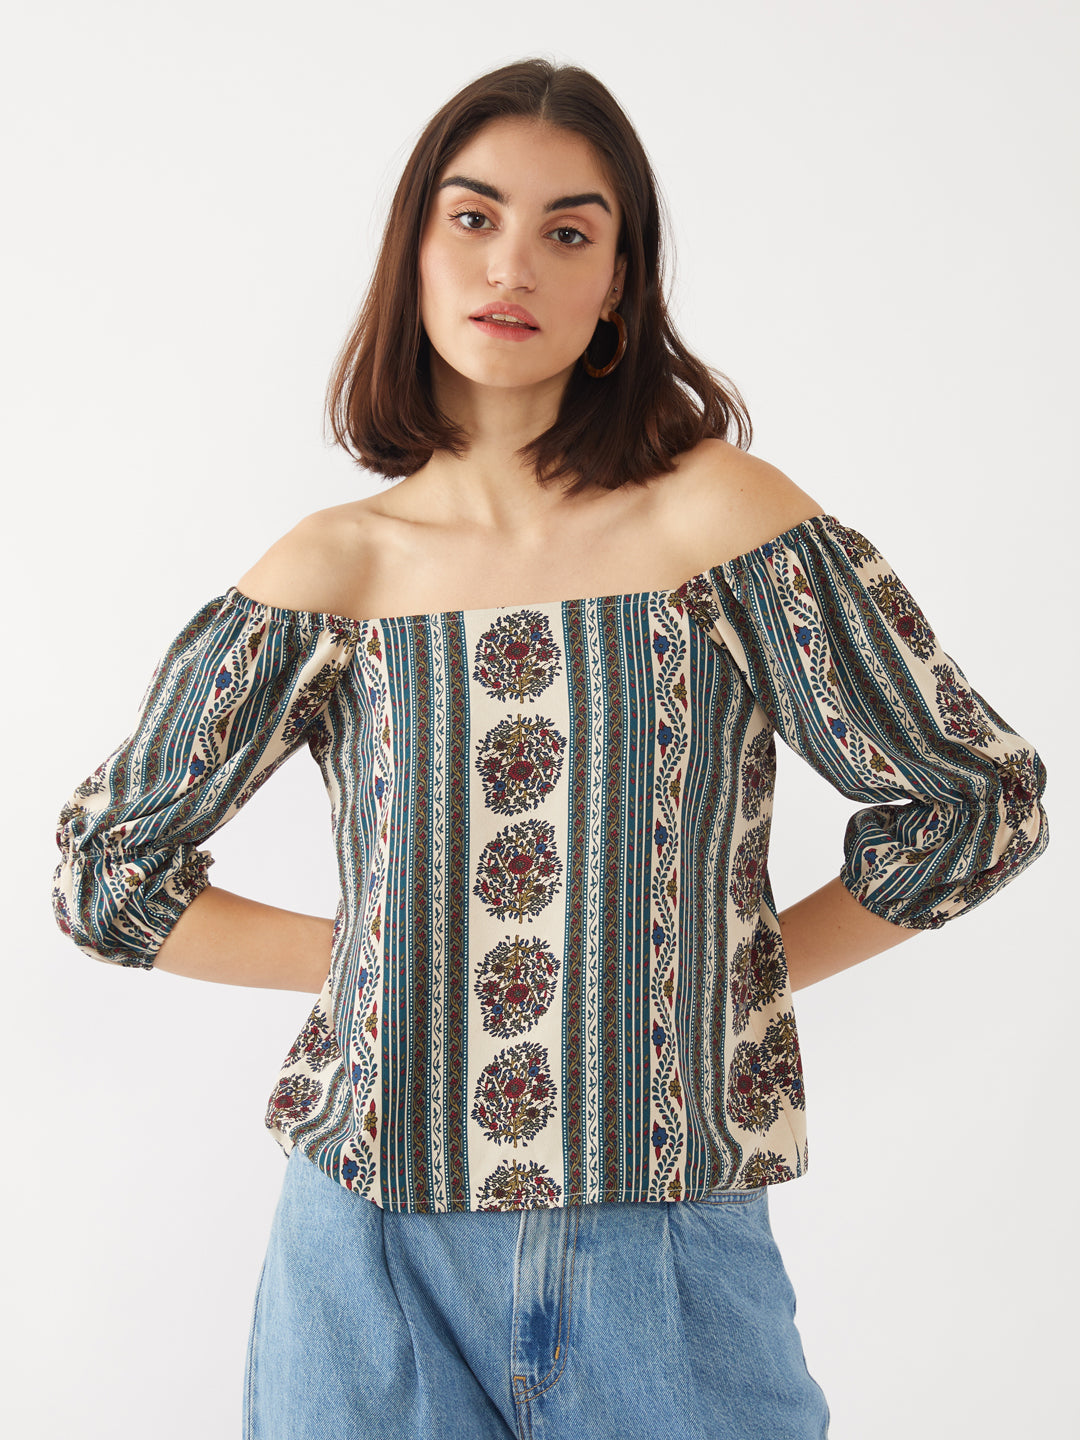 Multicolored Floral Print Top For Women